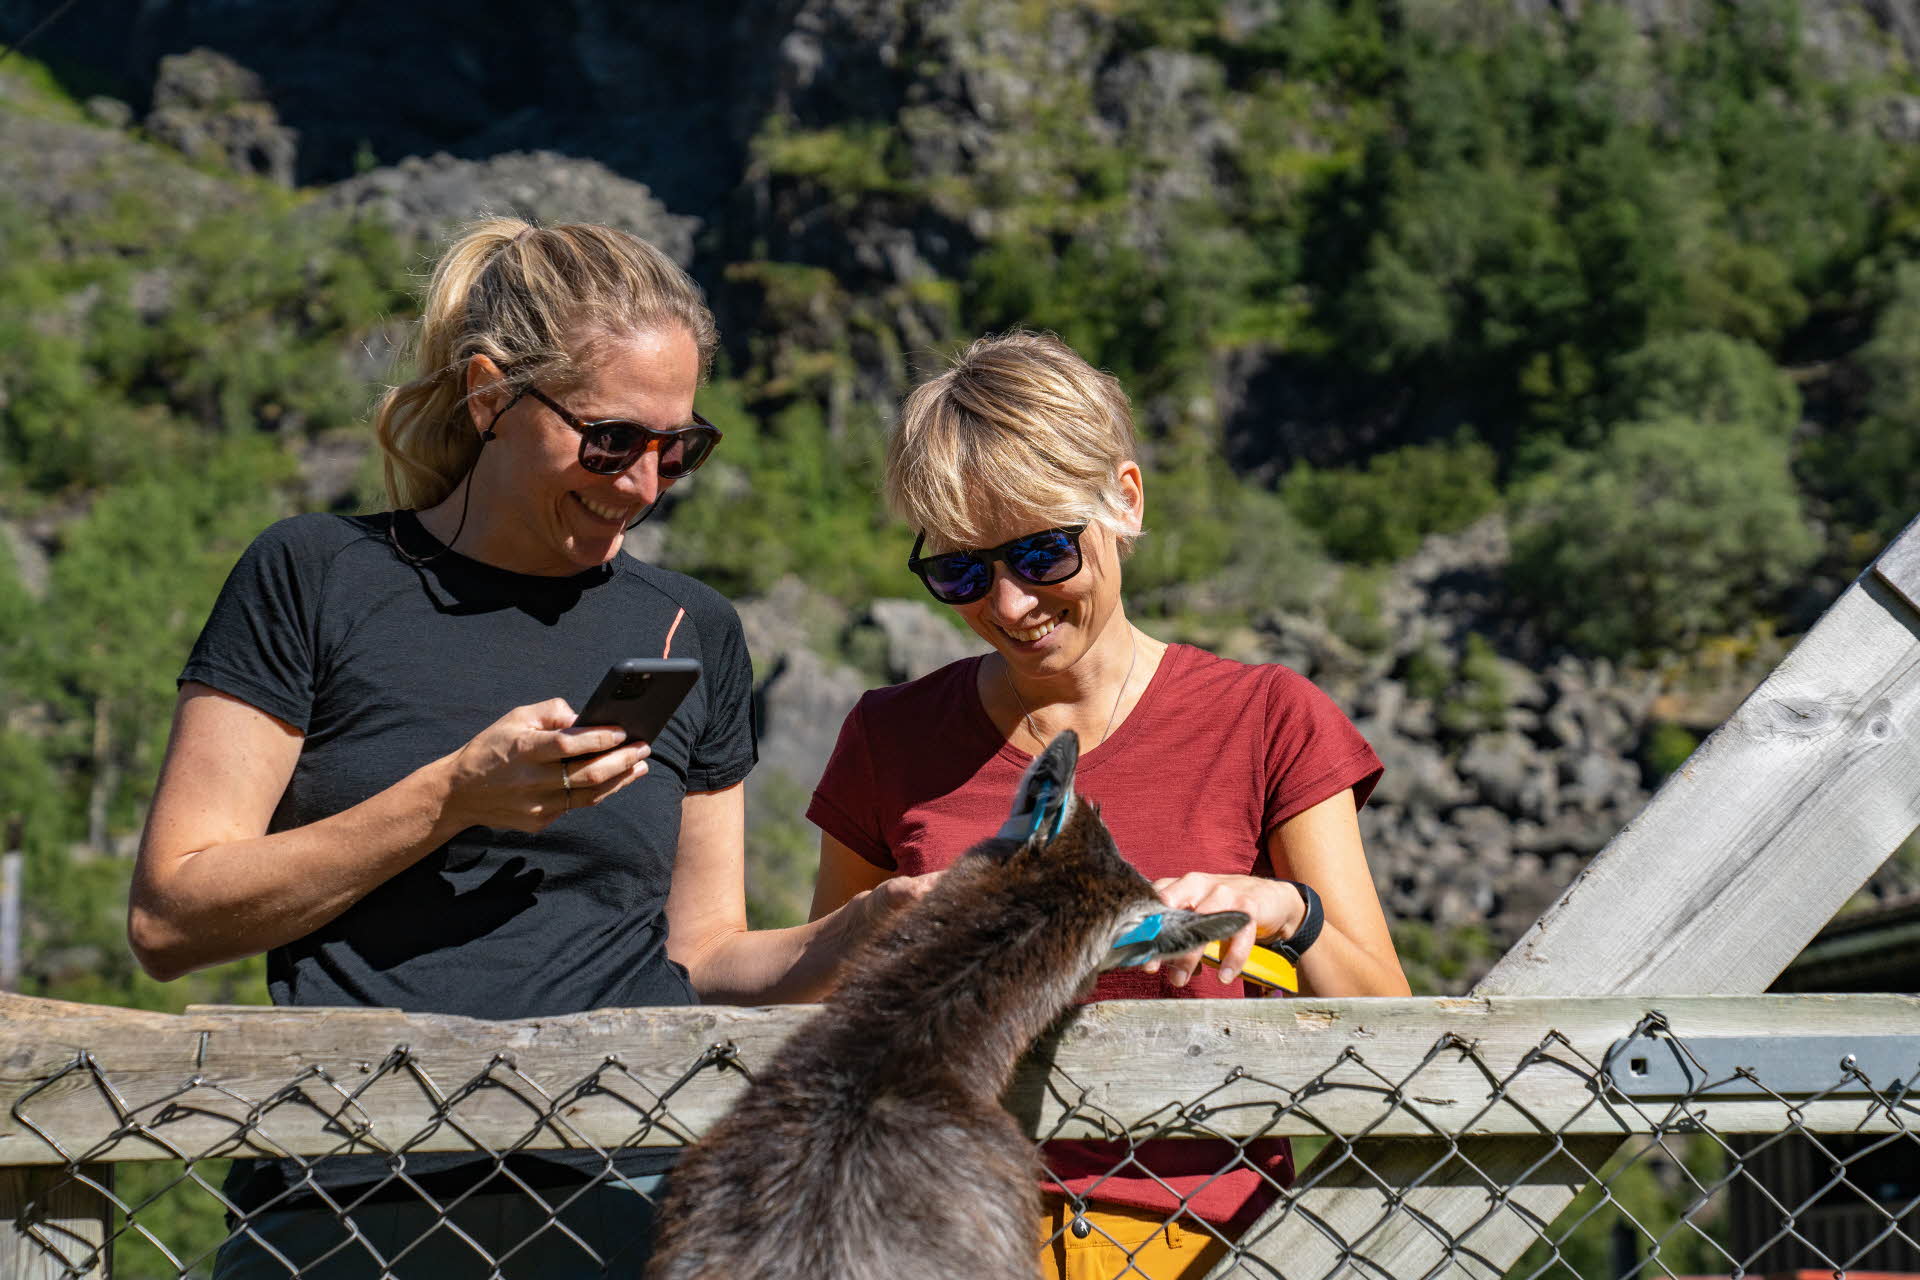 Two blonde women smiling while patting a goat over a gate.